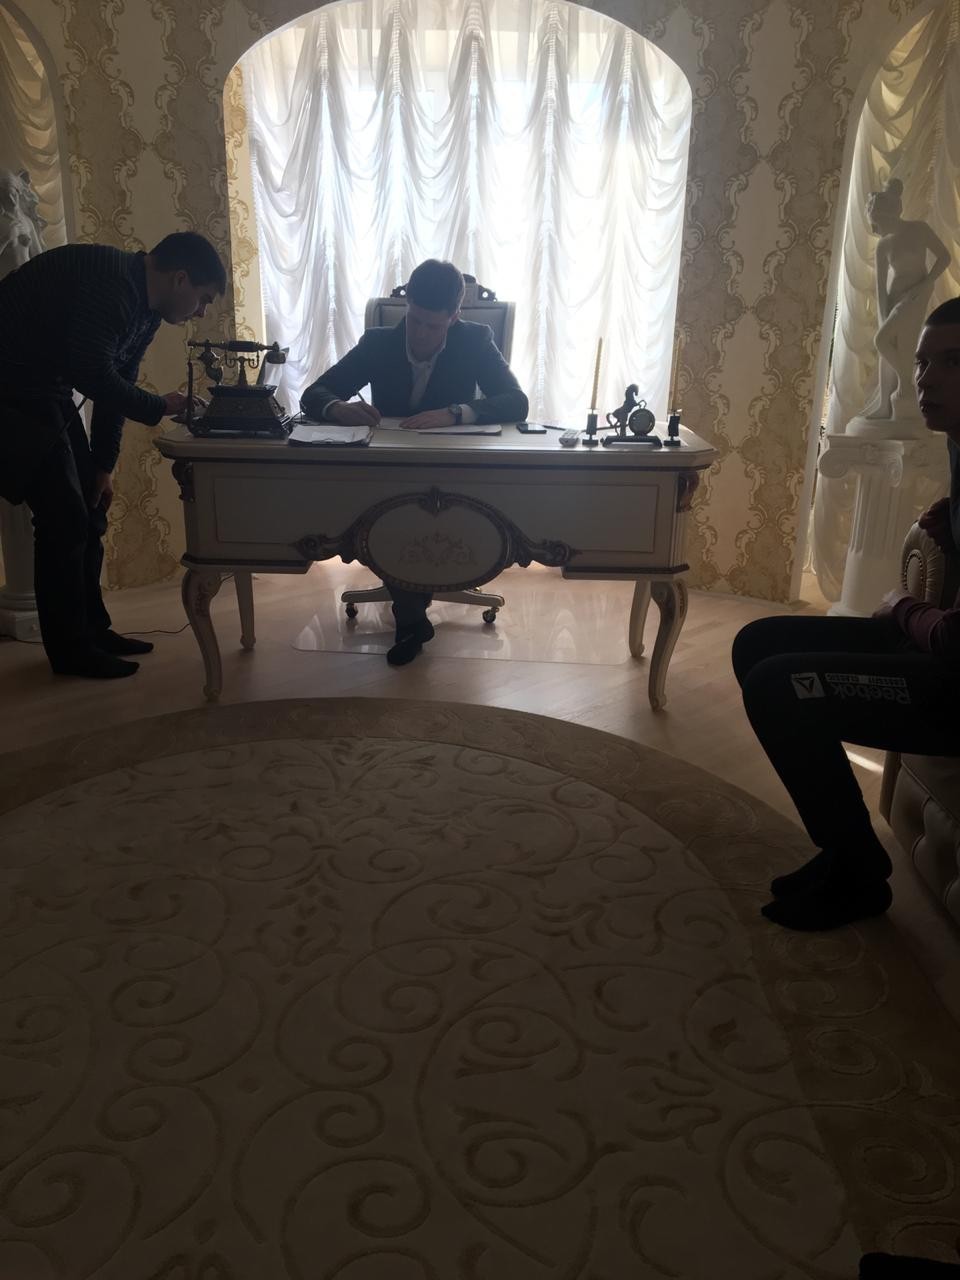 Luxury furniture and bags of money: photo of a search at the Novosibirsk City Hall official - Officials, Longpost, Corruption, Embezzlement, Novosibirsk, Negative